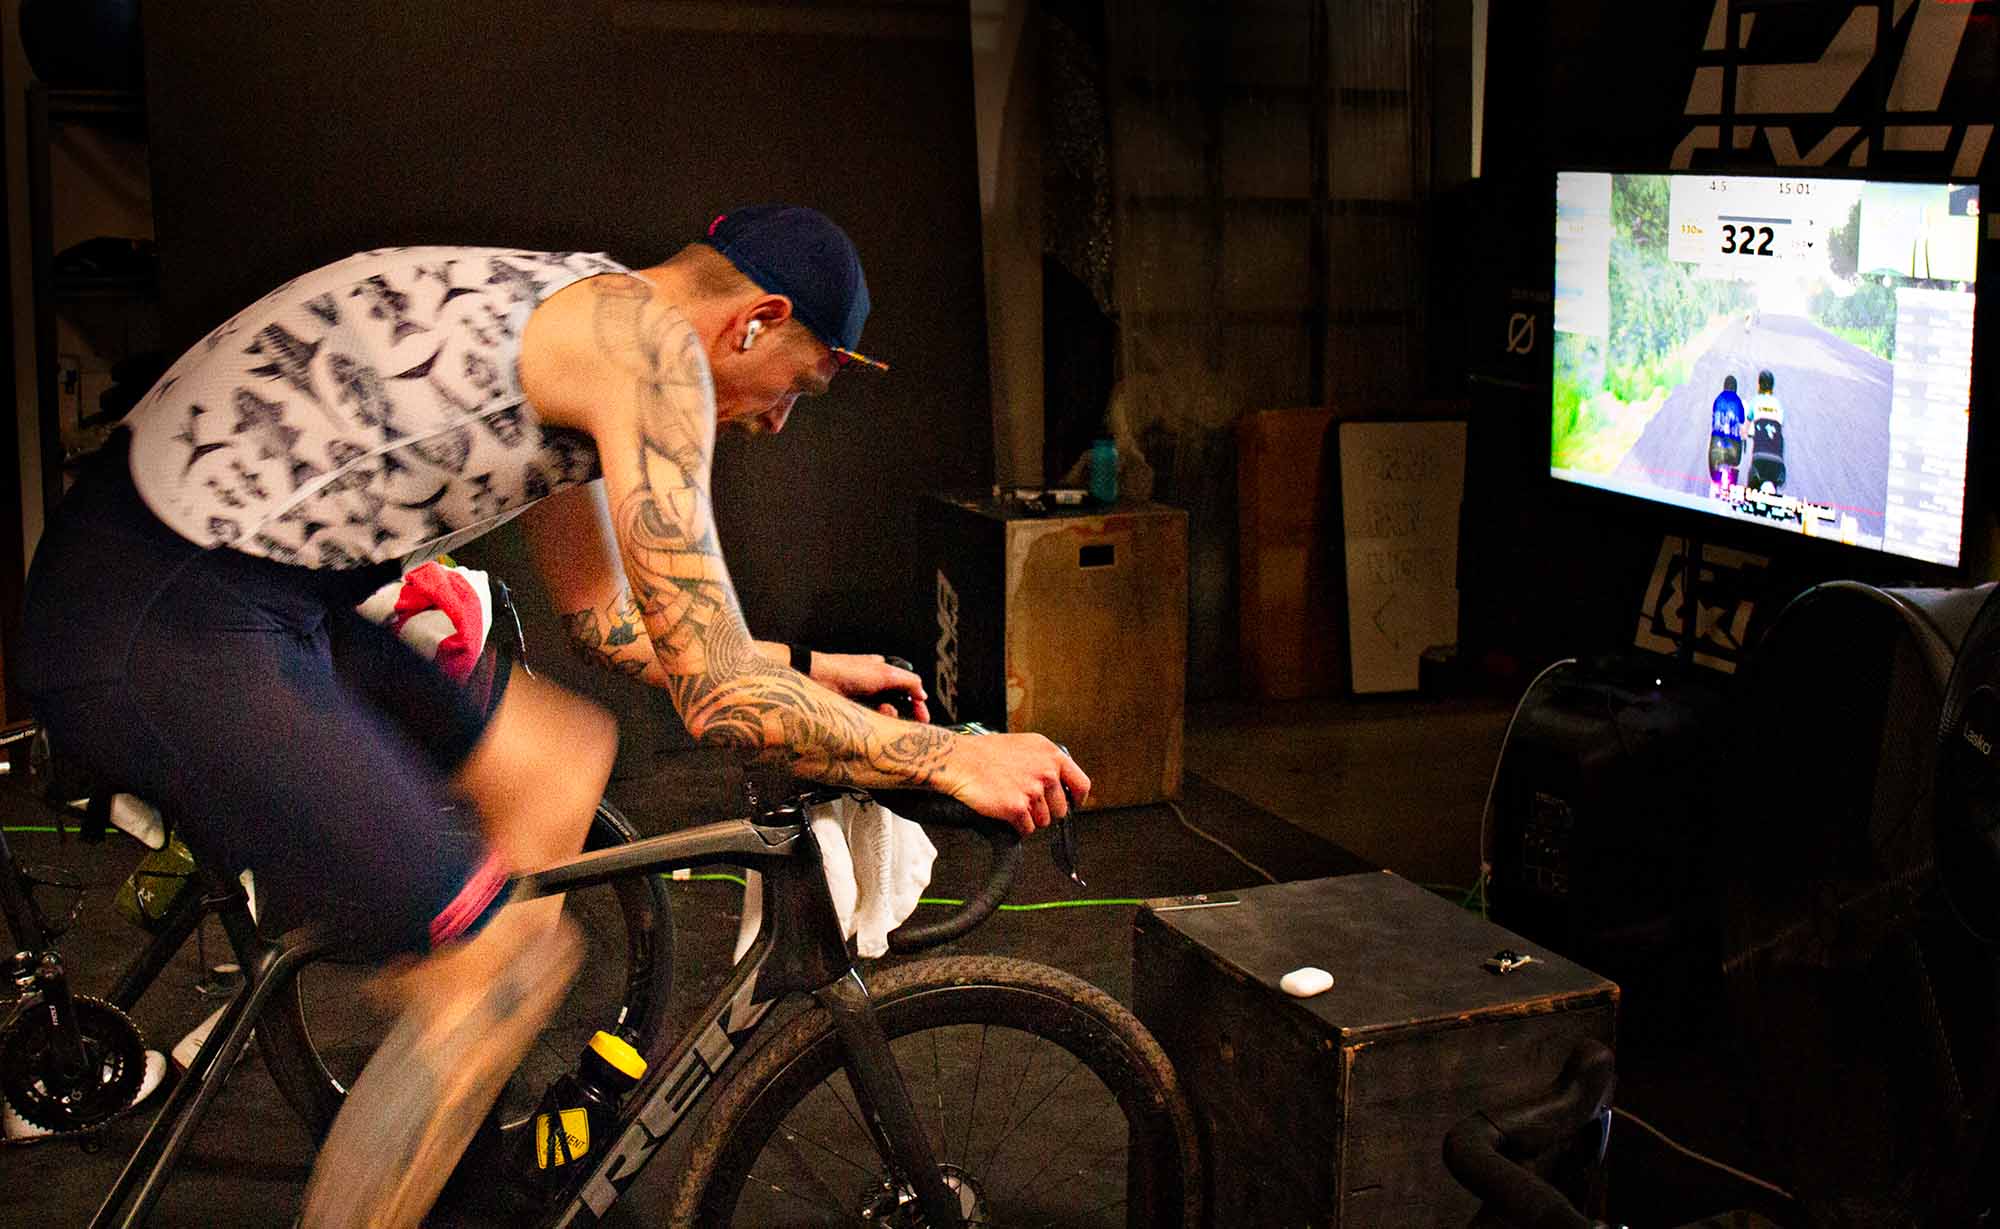 indoor cyclist wearing dna cycling clothing.